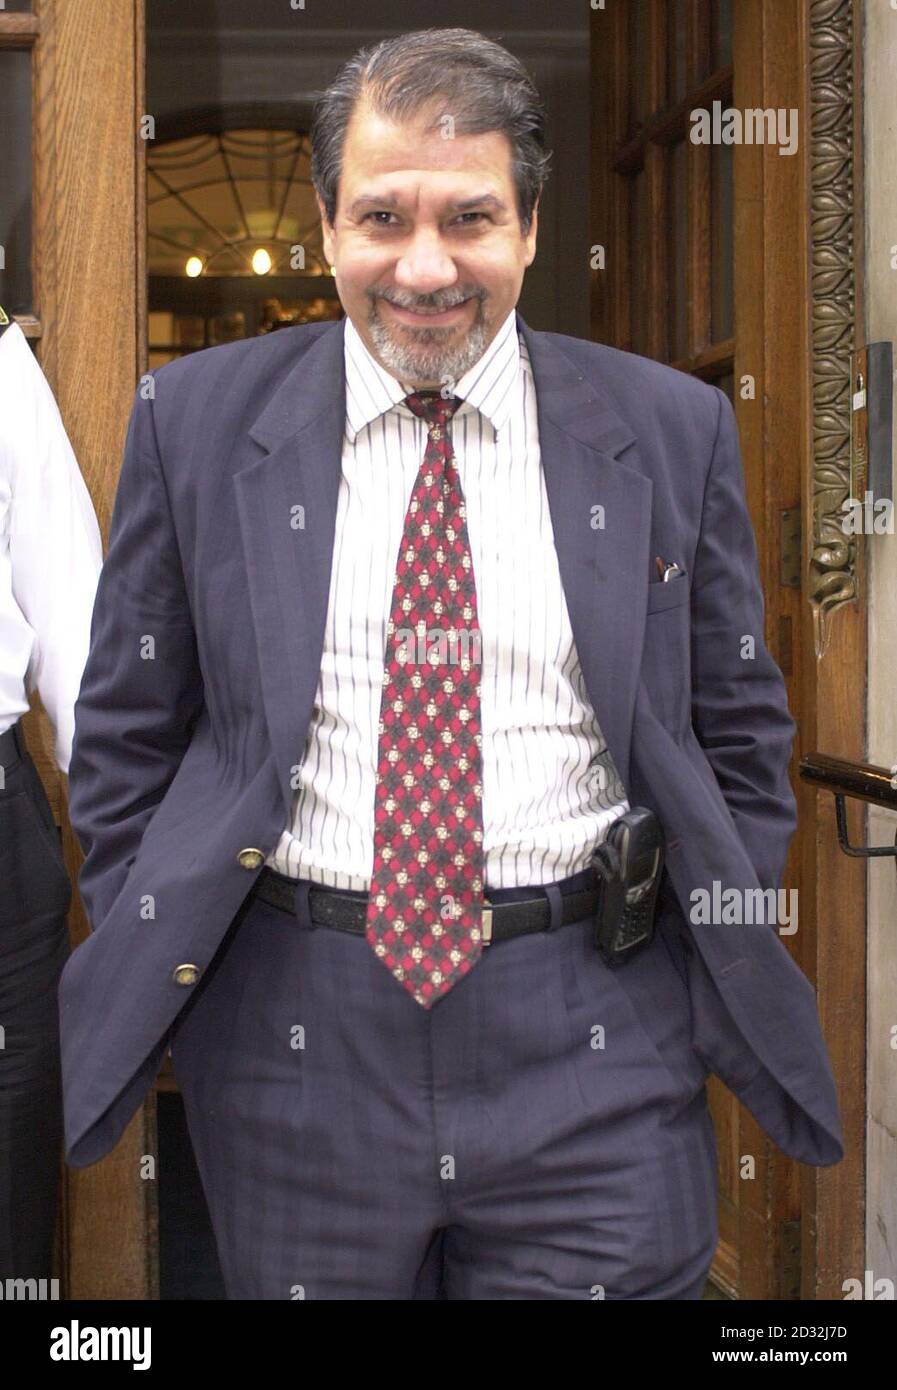 Consultant Surgeon Mohannad Abdul Al-Fallouji leaves the General Medical Council, London. Al-Fallouji, 46, of Liversedge, West Yorkshire, faces a catalogue of allegations and denies serious professional misconduct while working at the Pilgrim Hospital in Boston, Lincolnshire.  Stock Photo